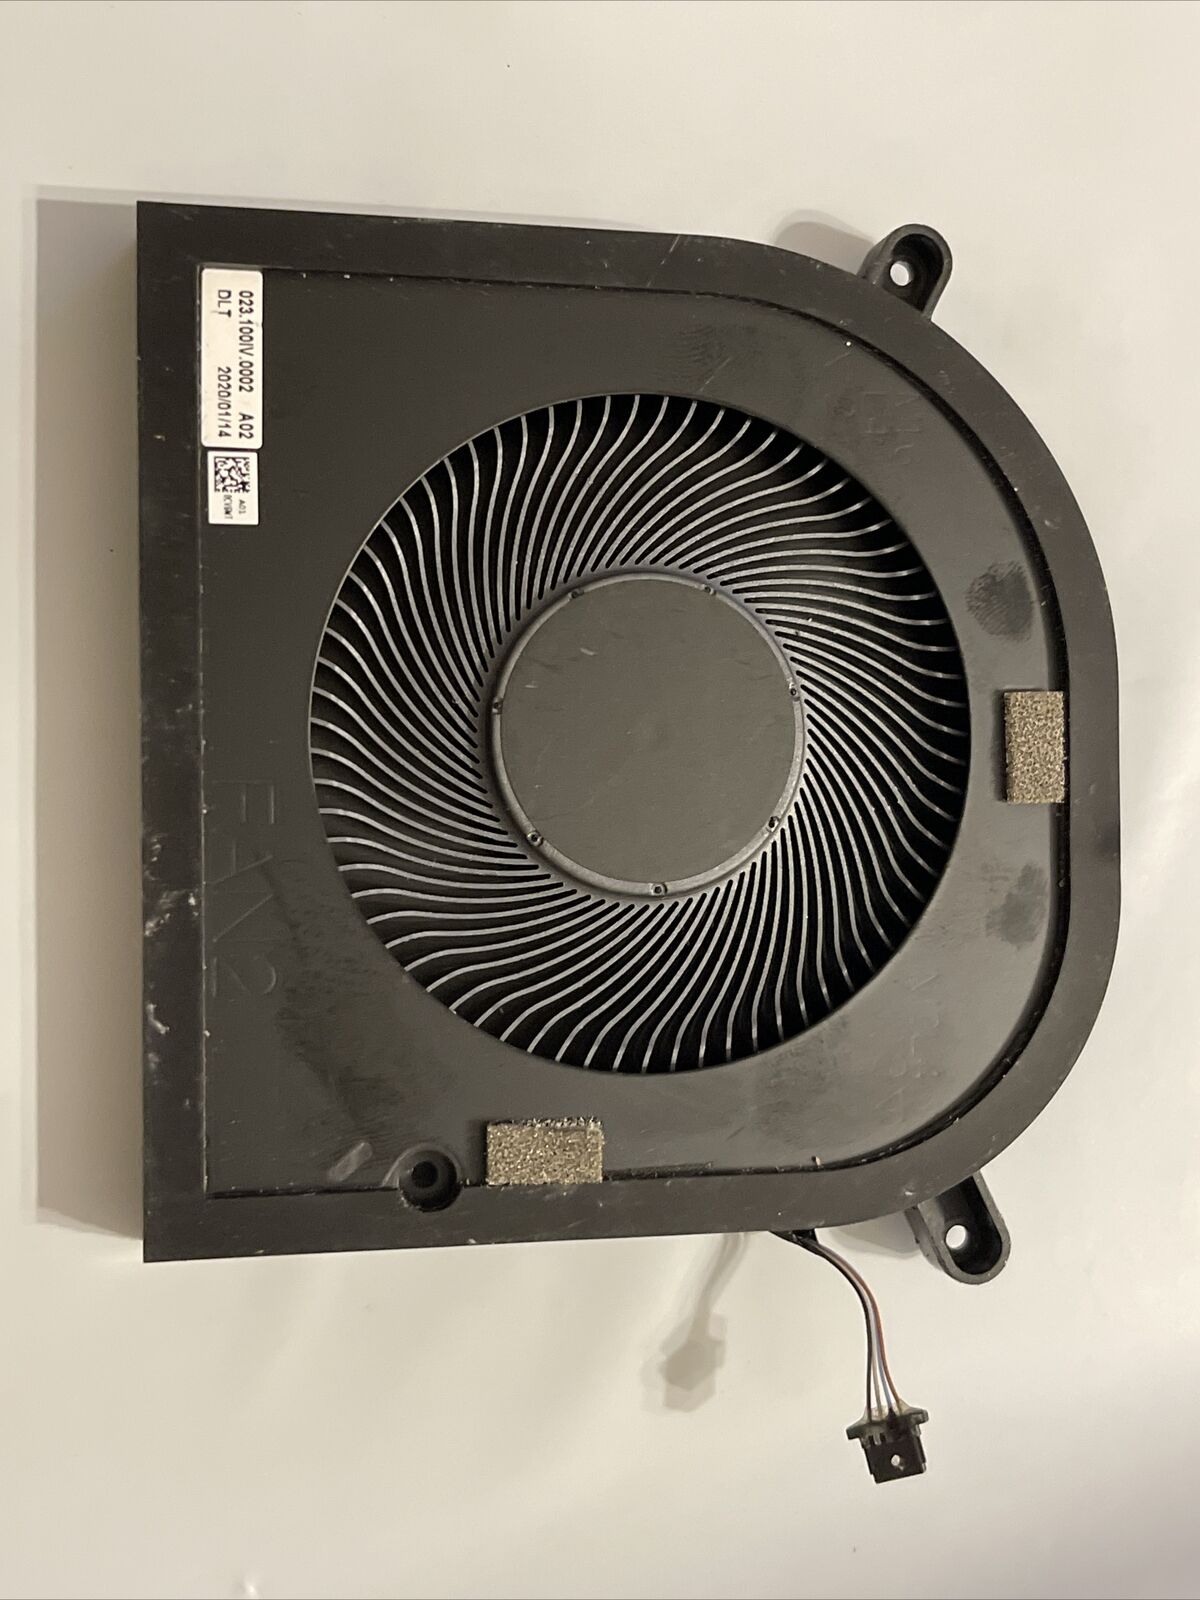 DELL Xps 9700 CPU cooling Fan RTX 2060 2020   023.100IV.0001 19G12 2y100 ND85C